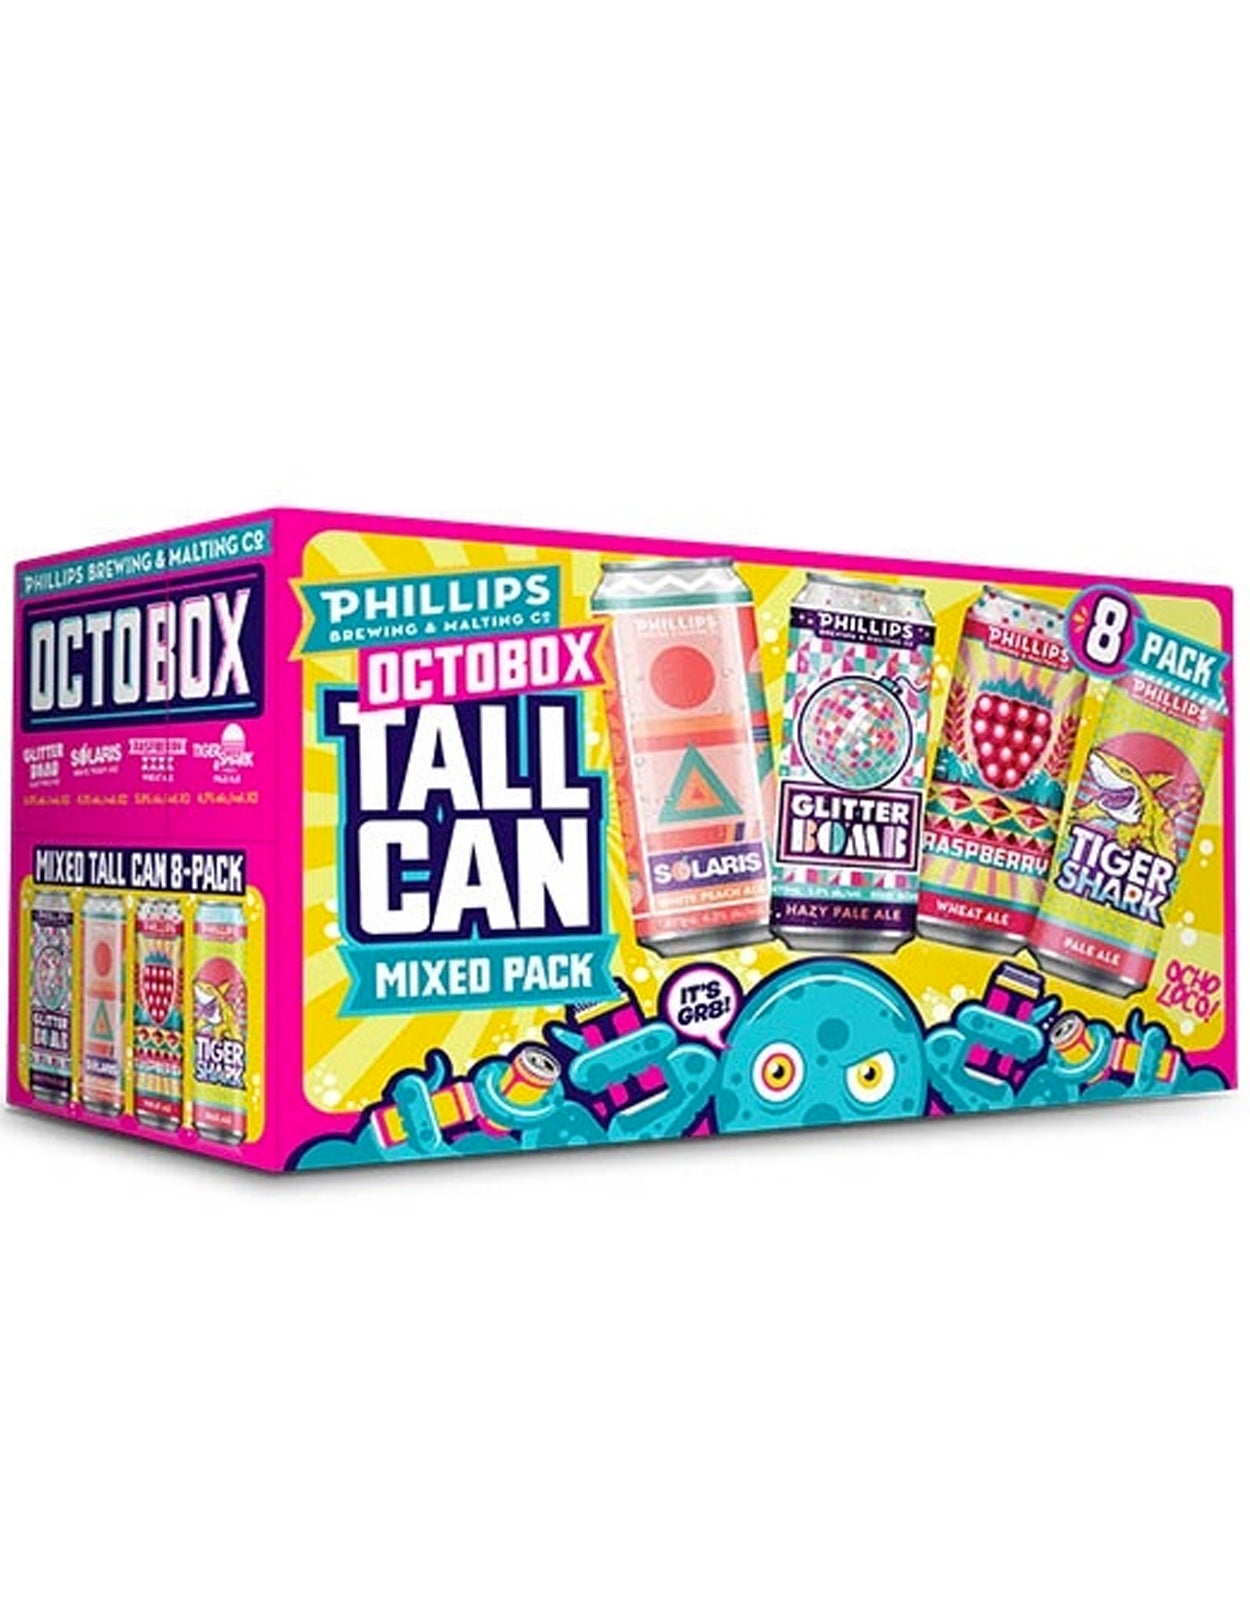 Phillips Octobox Mix Pack 473 ml - 8 Cans